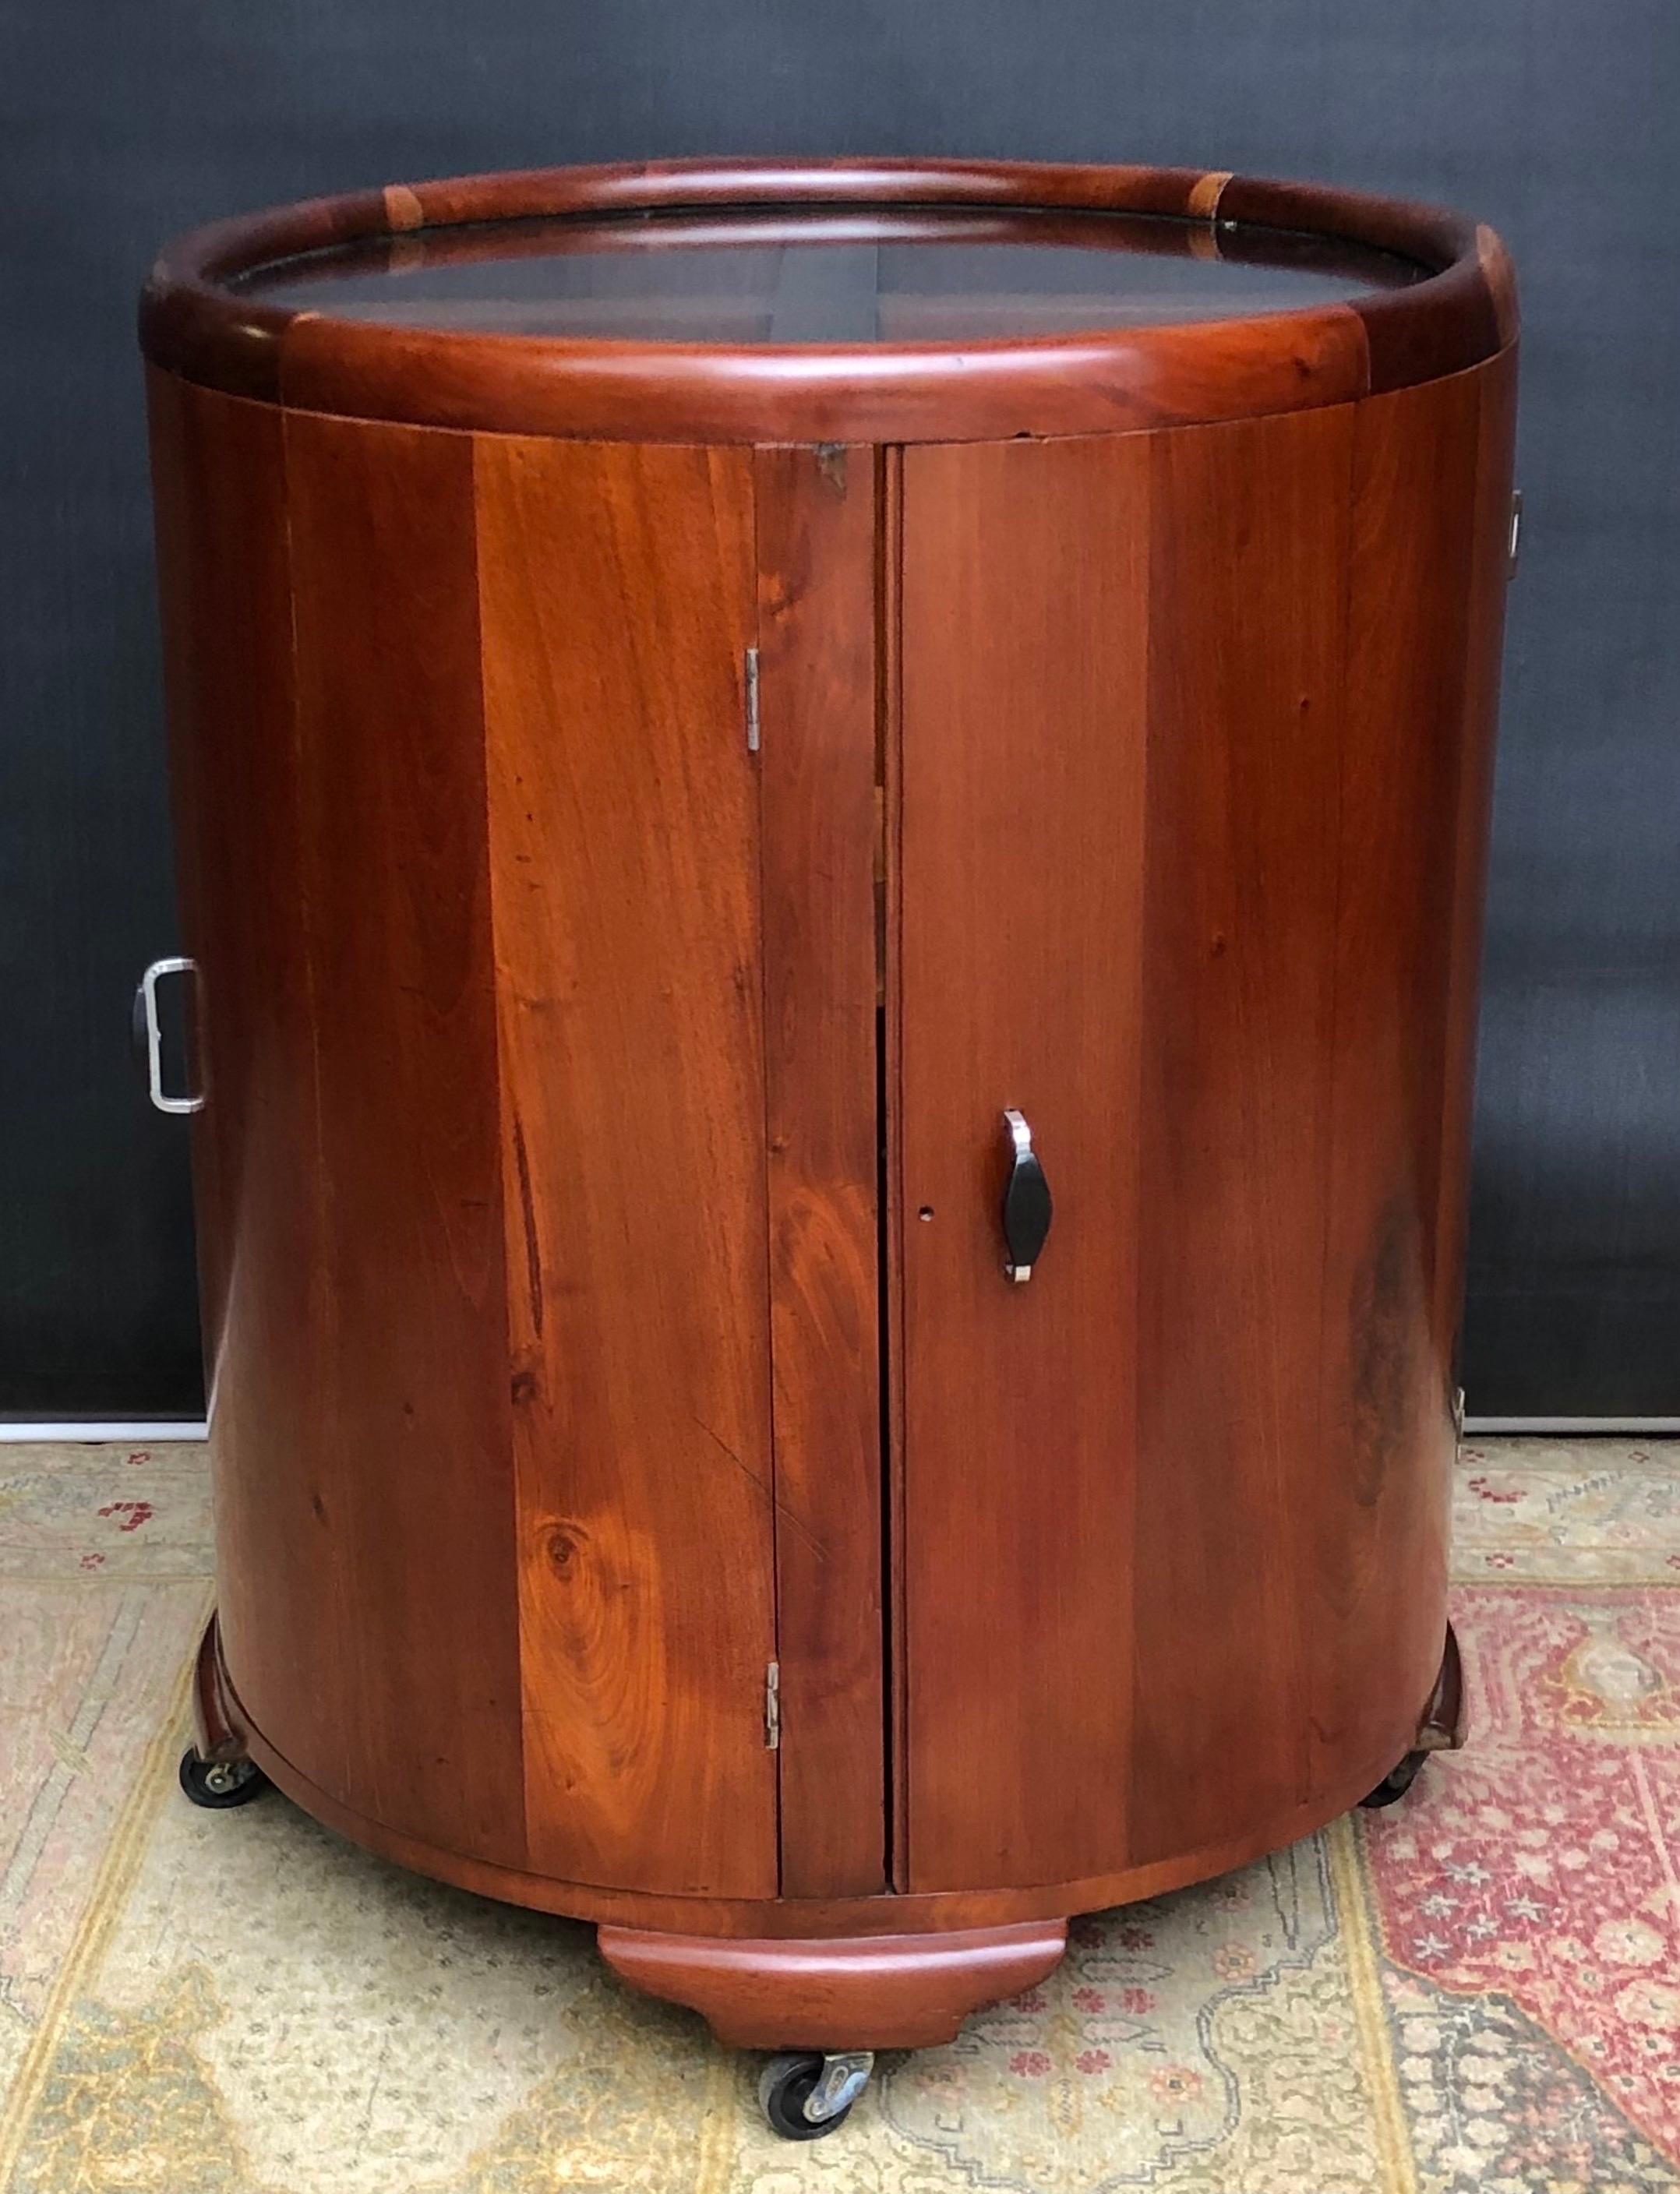 Glass Jamaican Art Deco Round Bar/Cocktail Cabinet By Burnett Webster(circa.1934-1939) For Sale